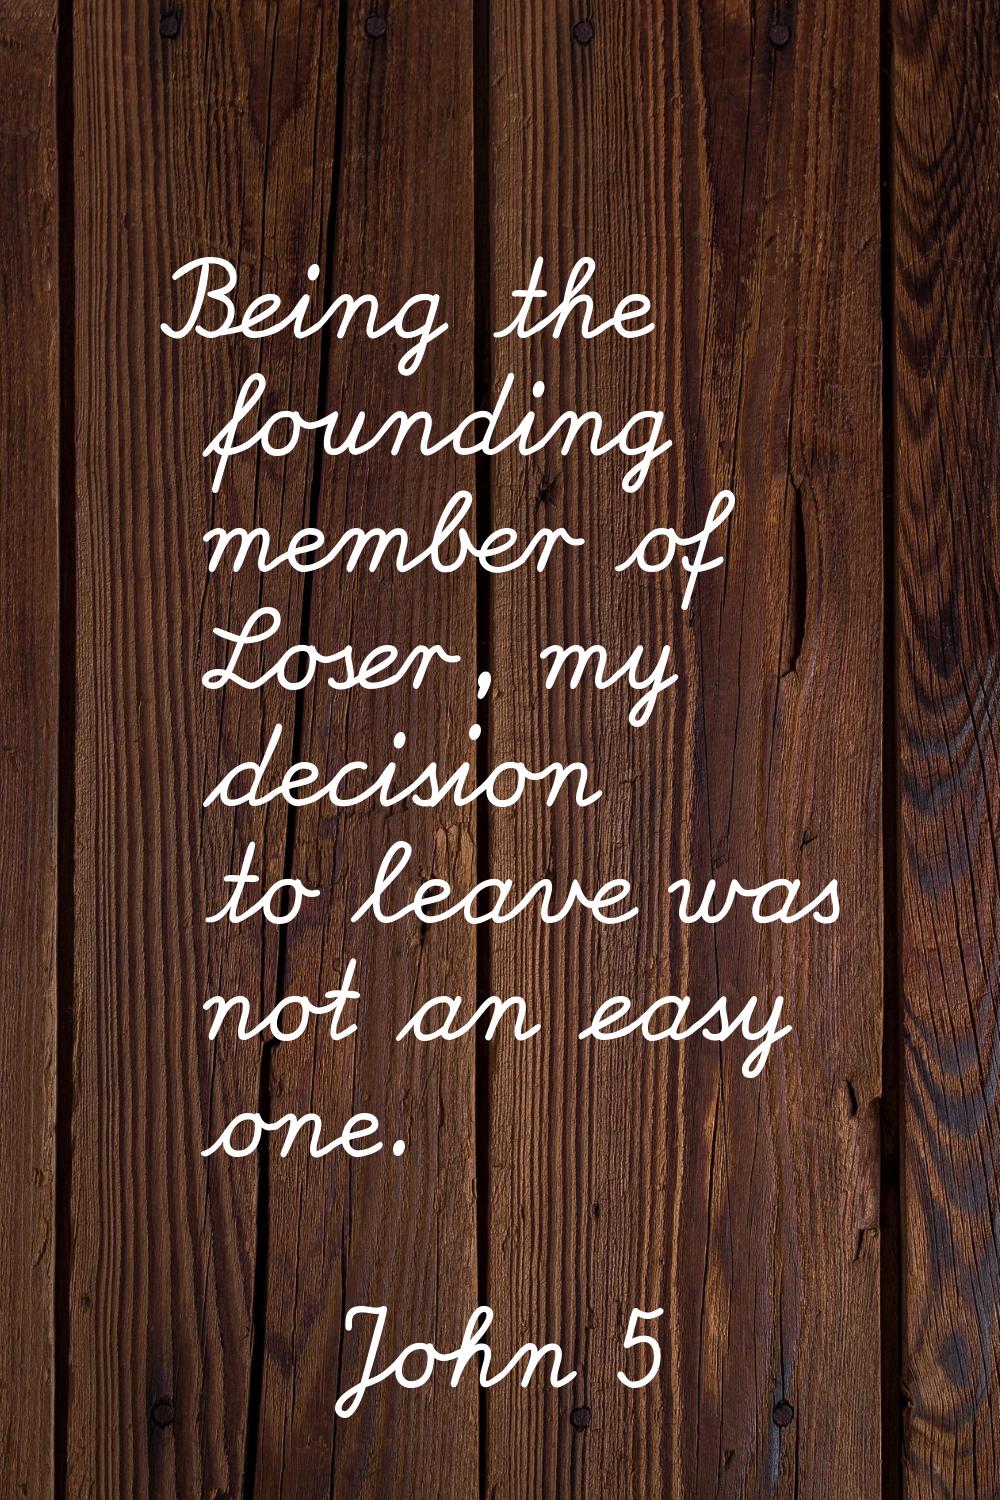 Being the founding member of Loser, my decision to leave was not an easy one.